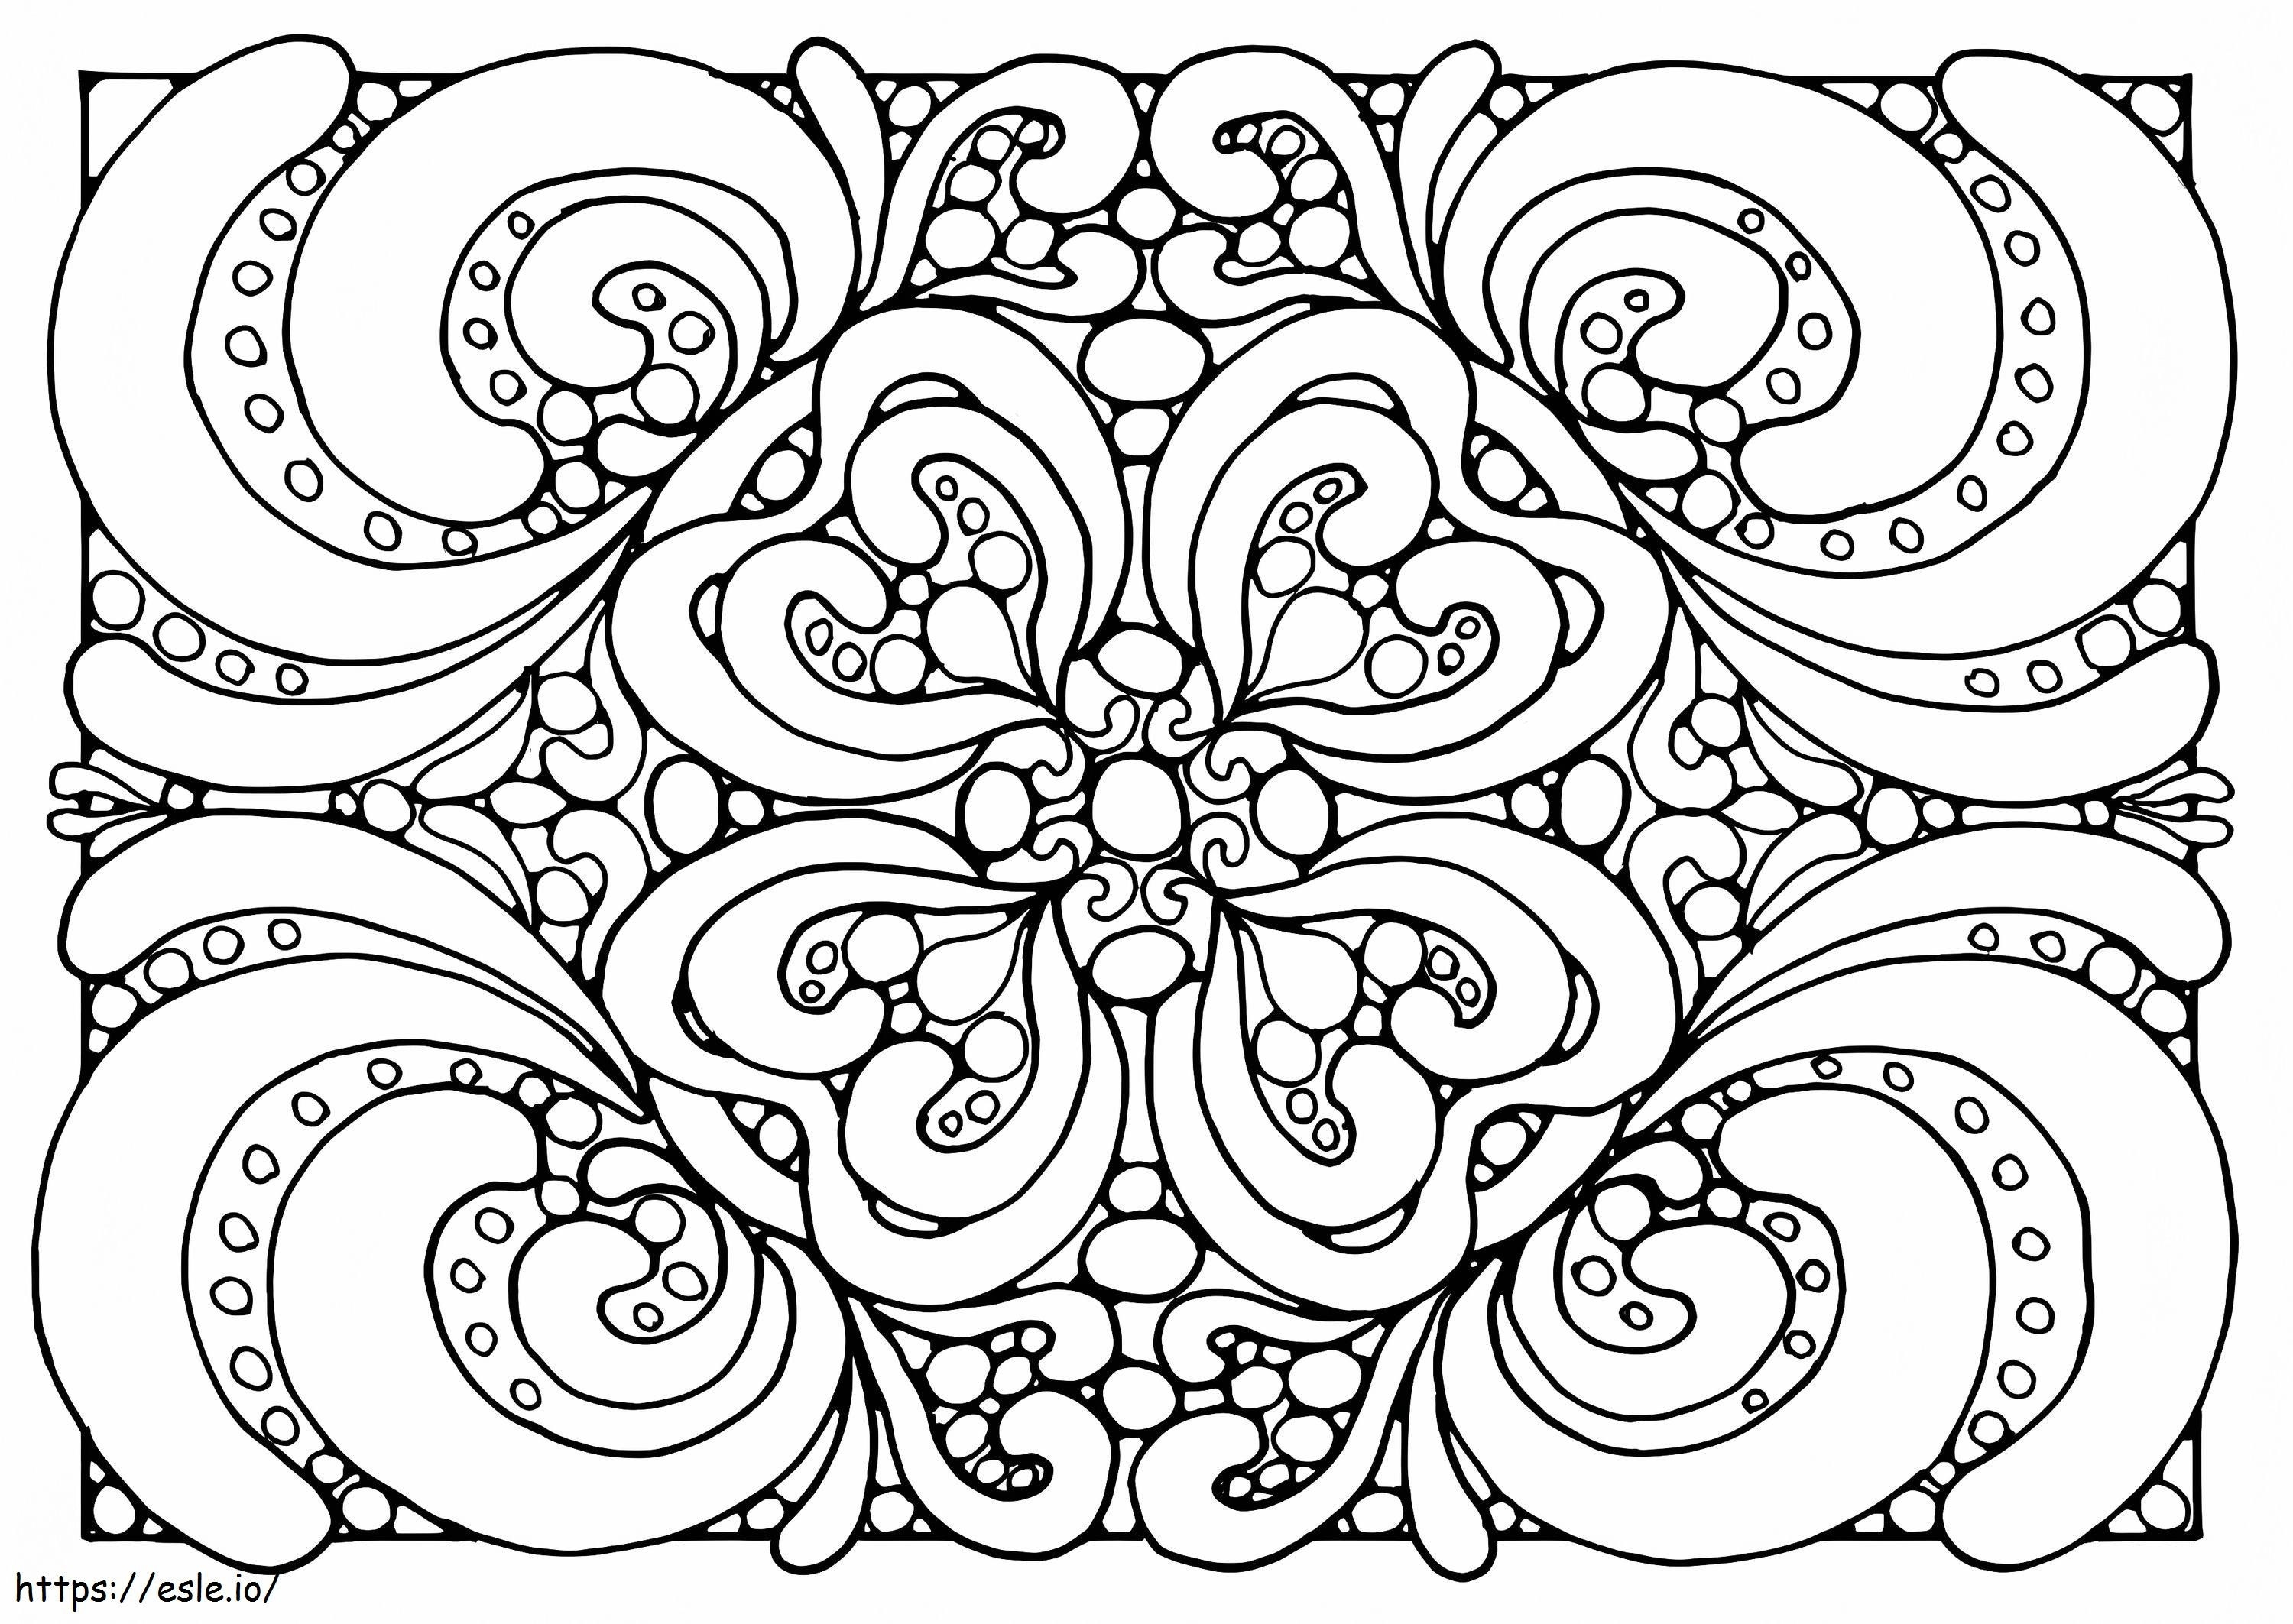 Free Stress Relief coloring page